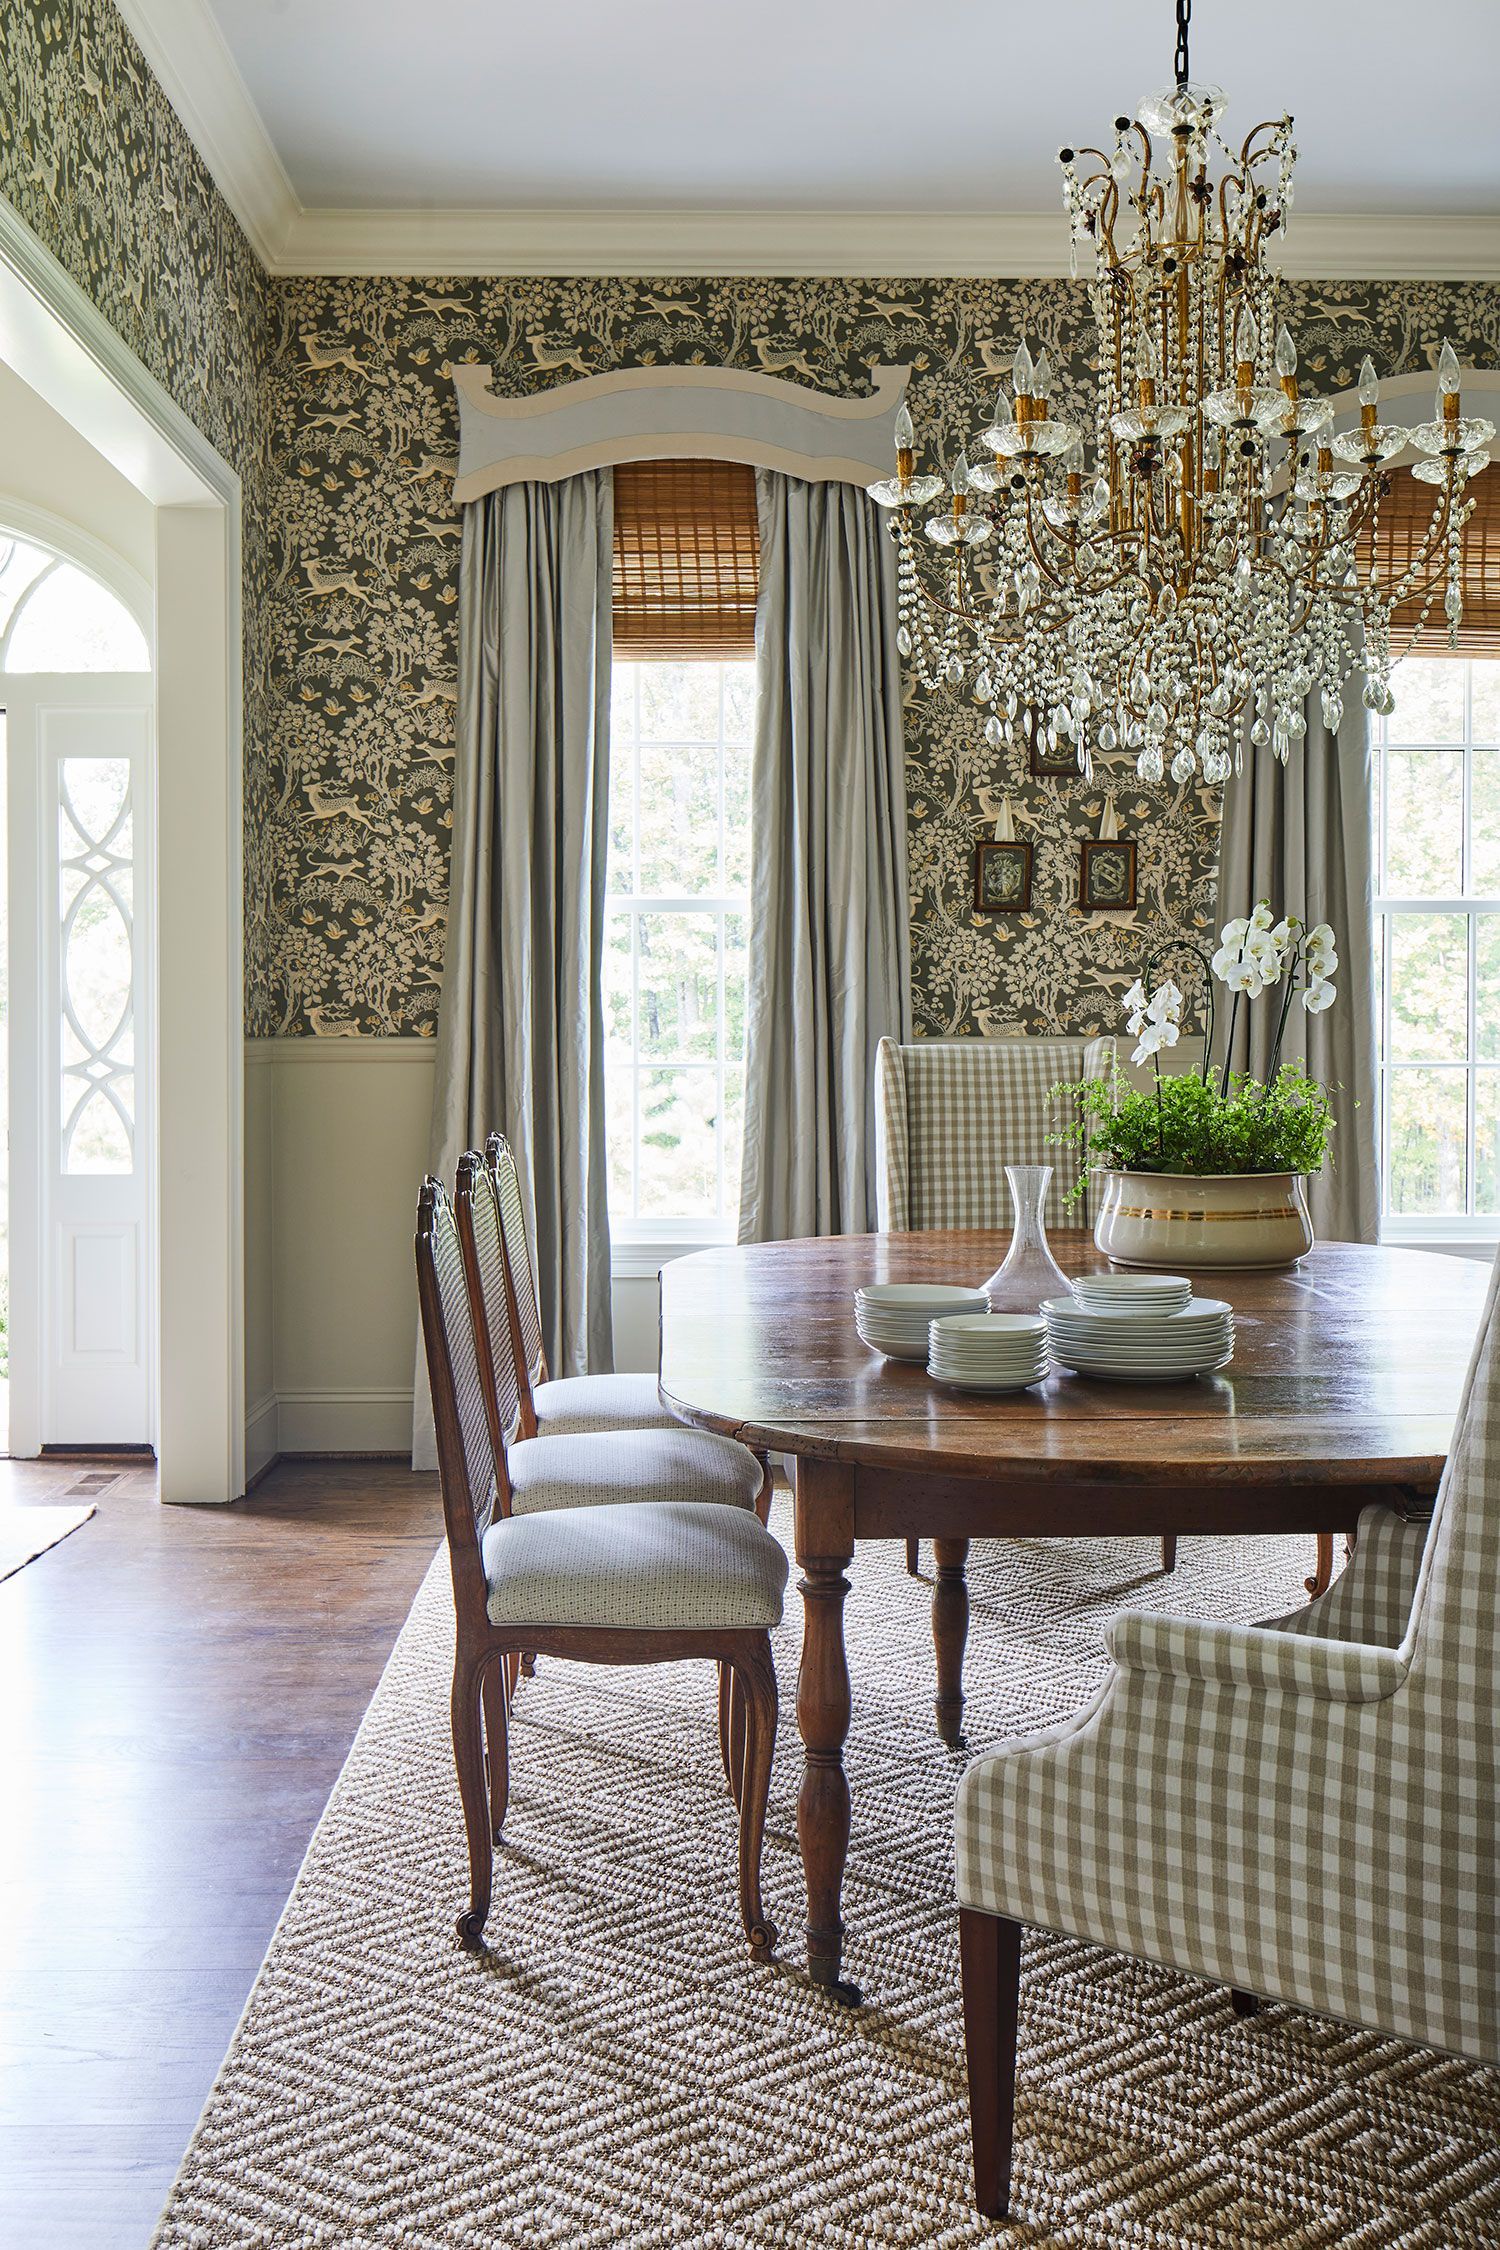 Classic Animal Prints for Dining Room Wall